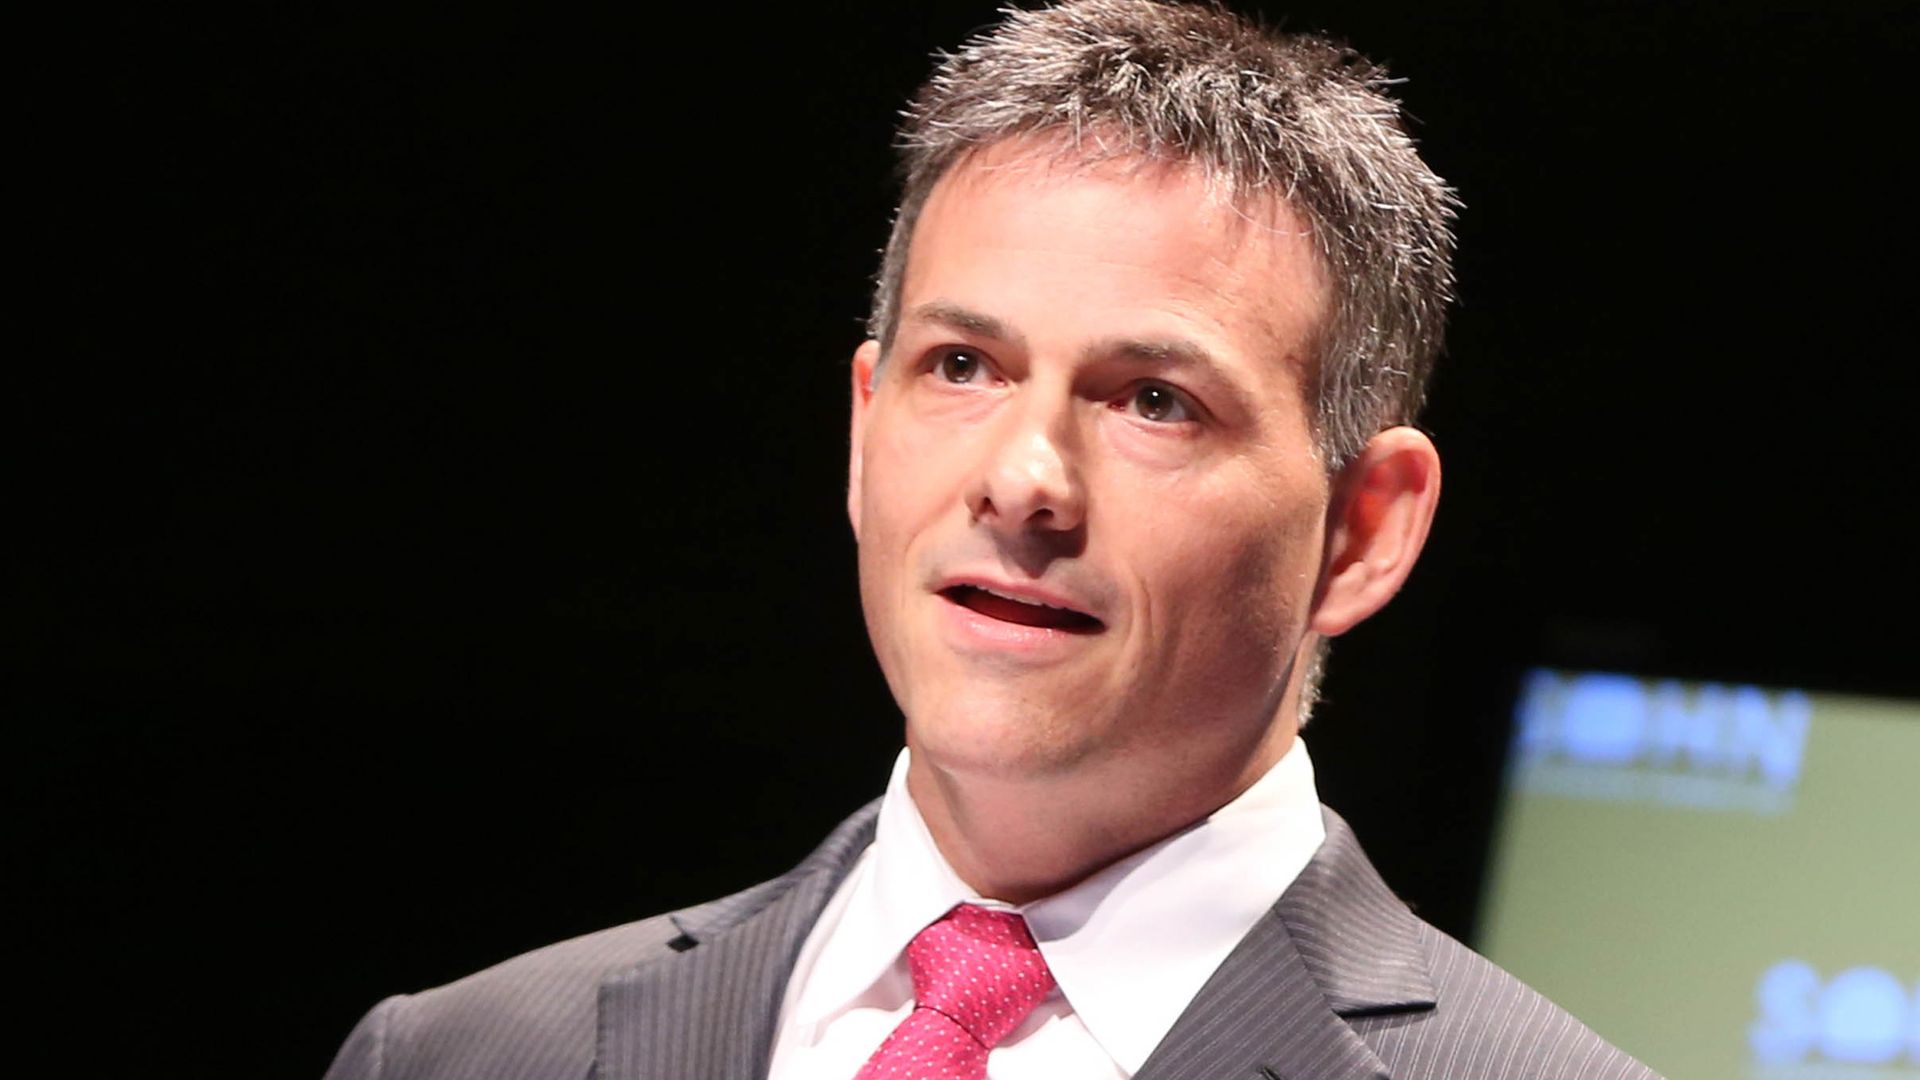 David Einhorn, Greenlight Capital Inc. Founder and President, at the 20th Annual Sohn Investment Conference in New York City on May 4, 2015